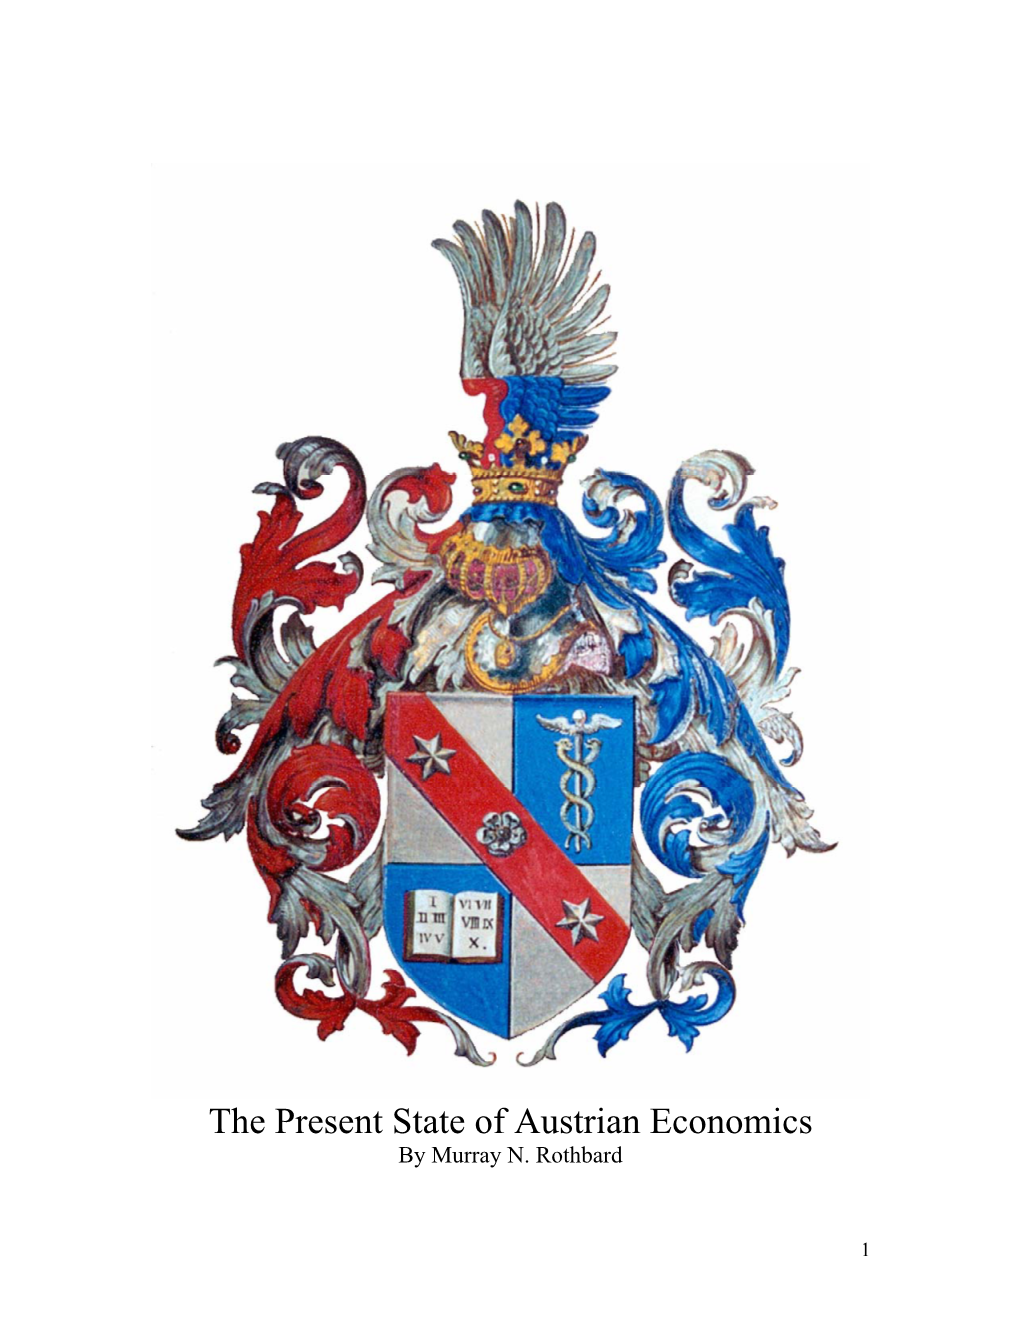 The Present State of Austrian Economics by Murray N